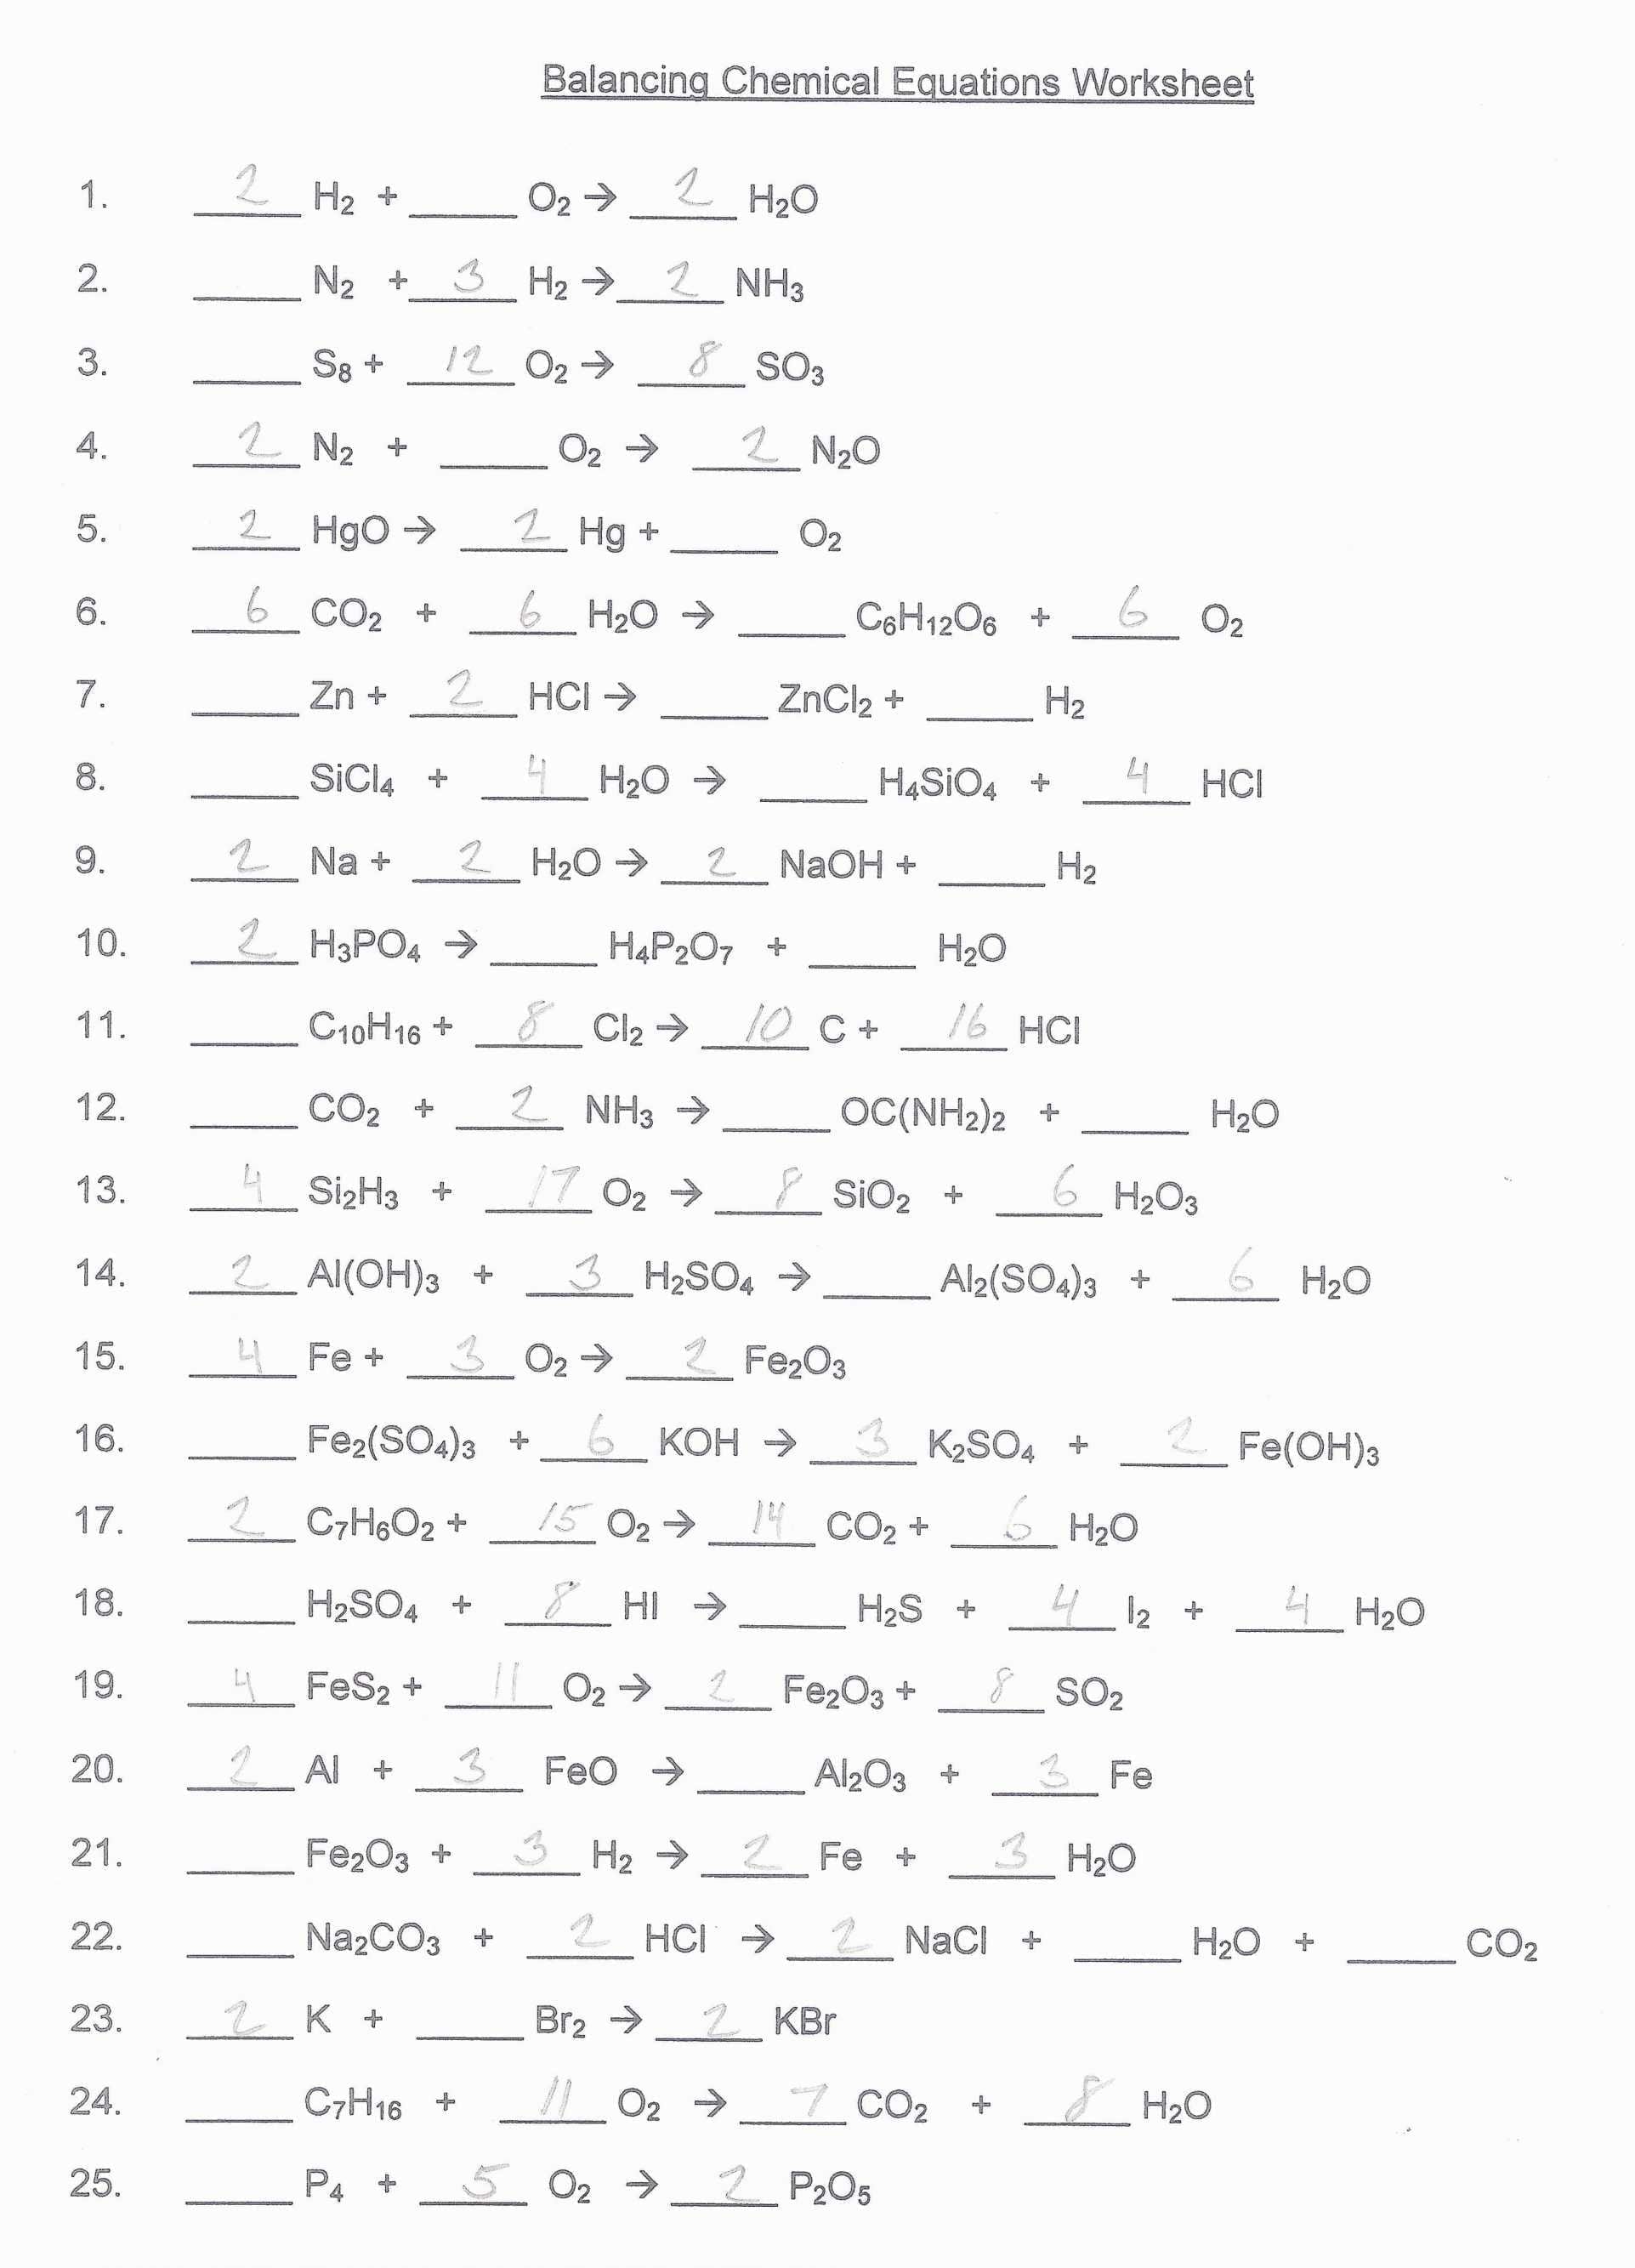 Chemistry Worksheet Lewis Dot Structures Answers  Newatvs With Regard To Chemistry Worksheet Lewis Dot Structures